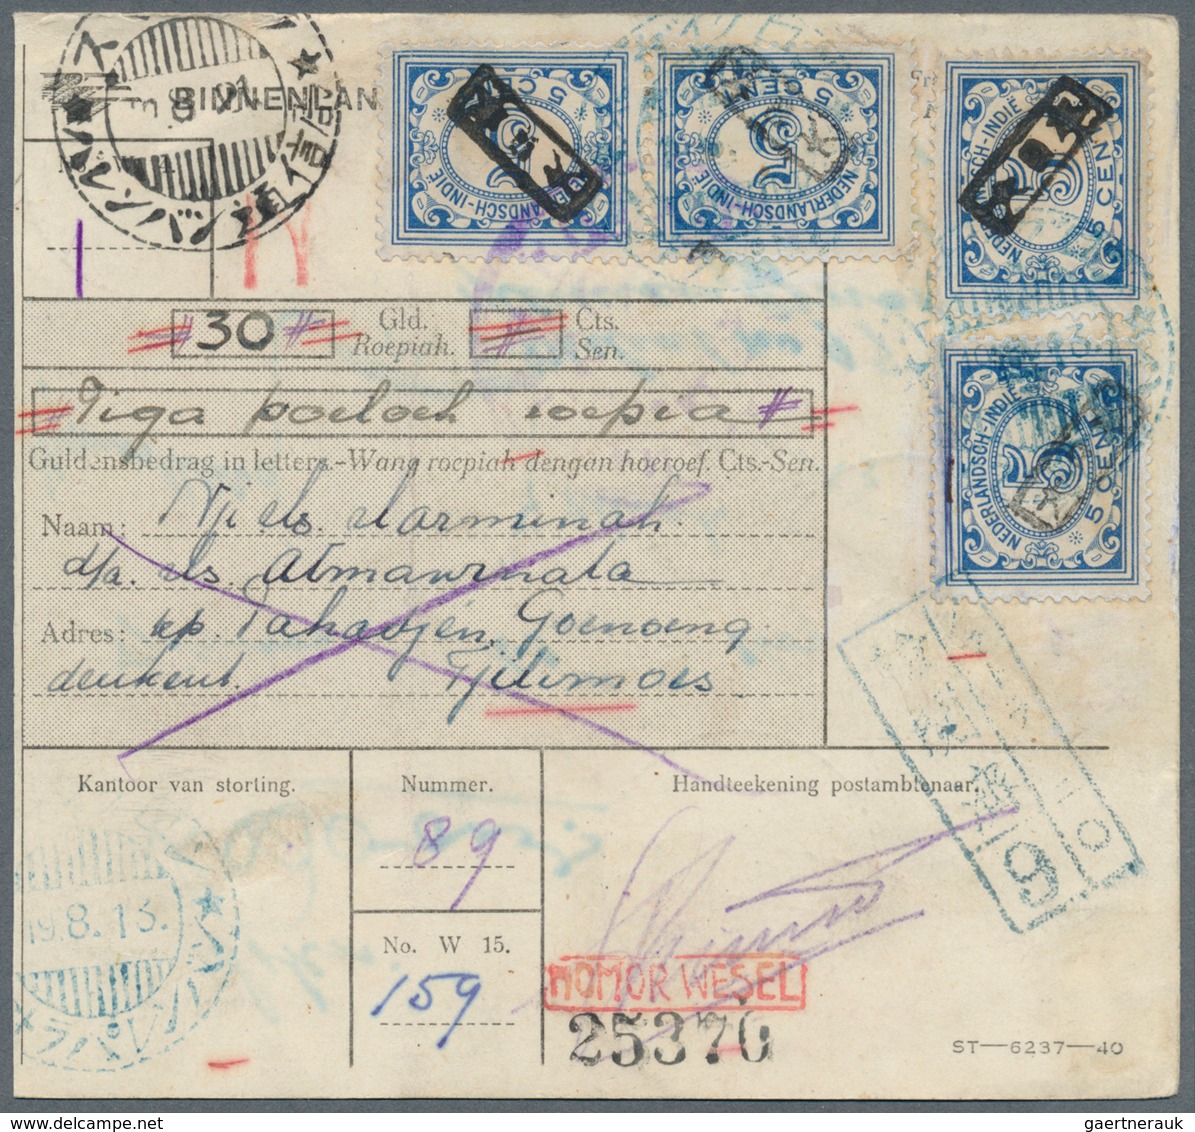 Japanische Besetzung WK II: 1942/45, covers/stationery (70+) plus some MNH units of due stamps Navy